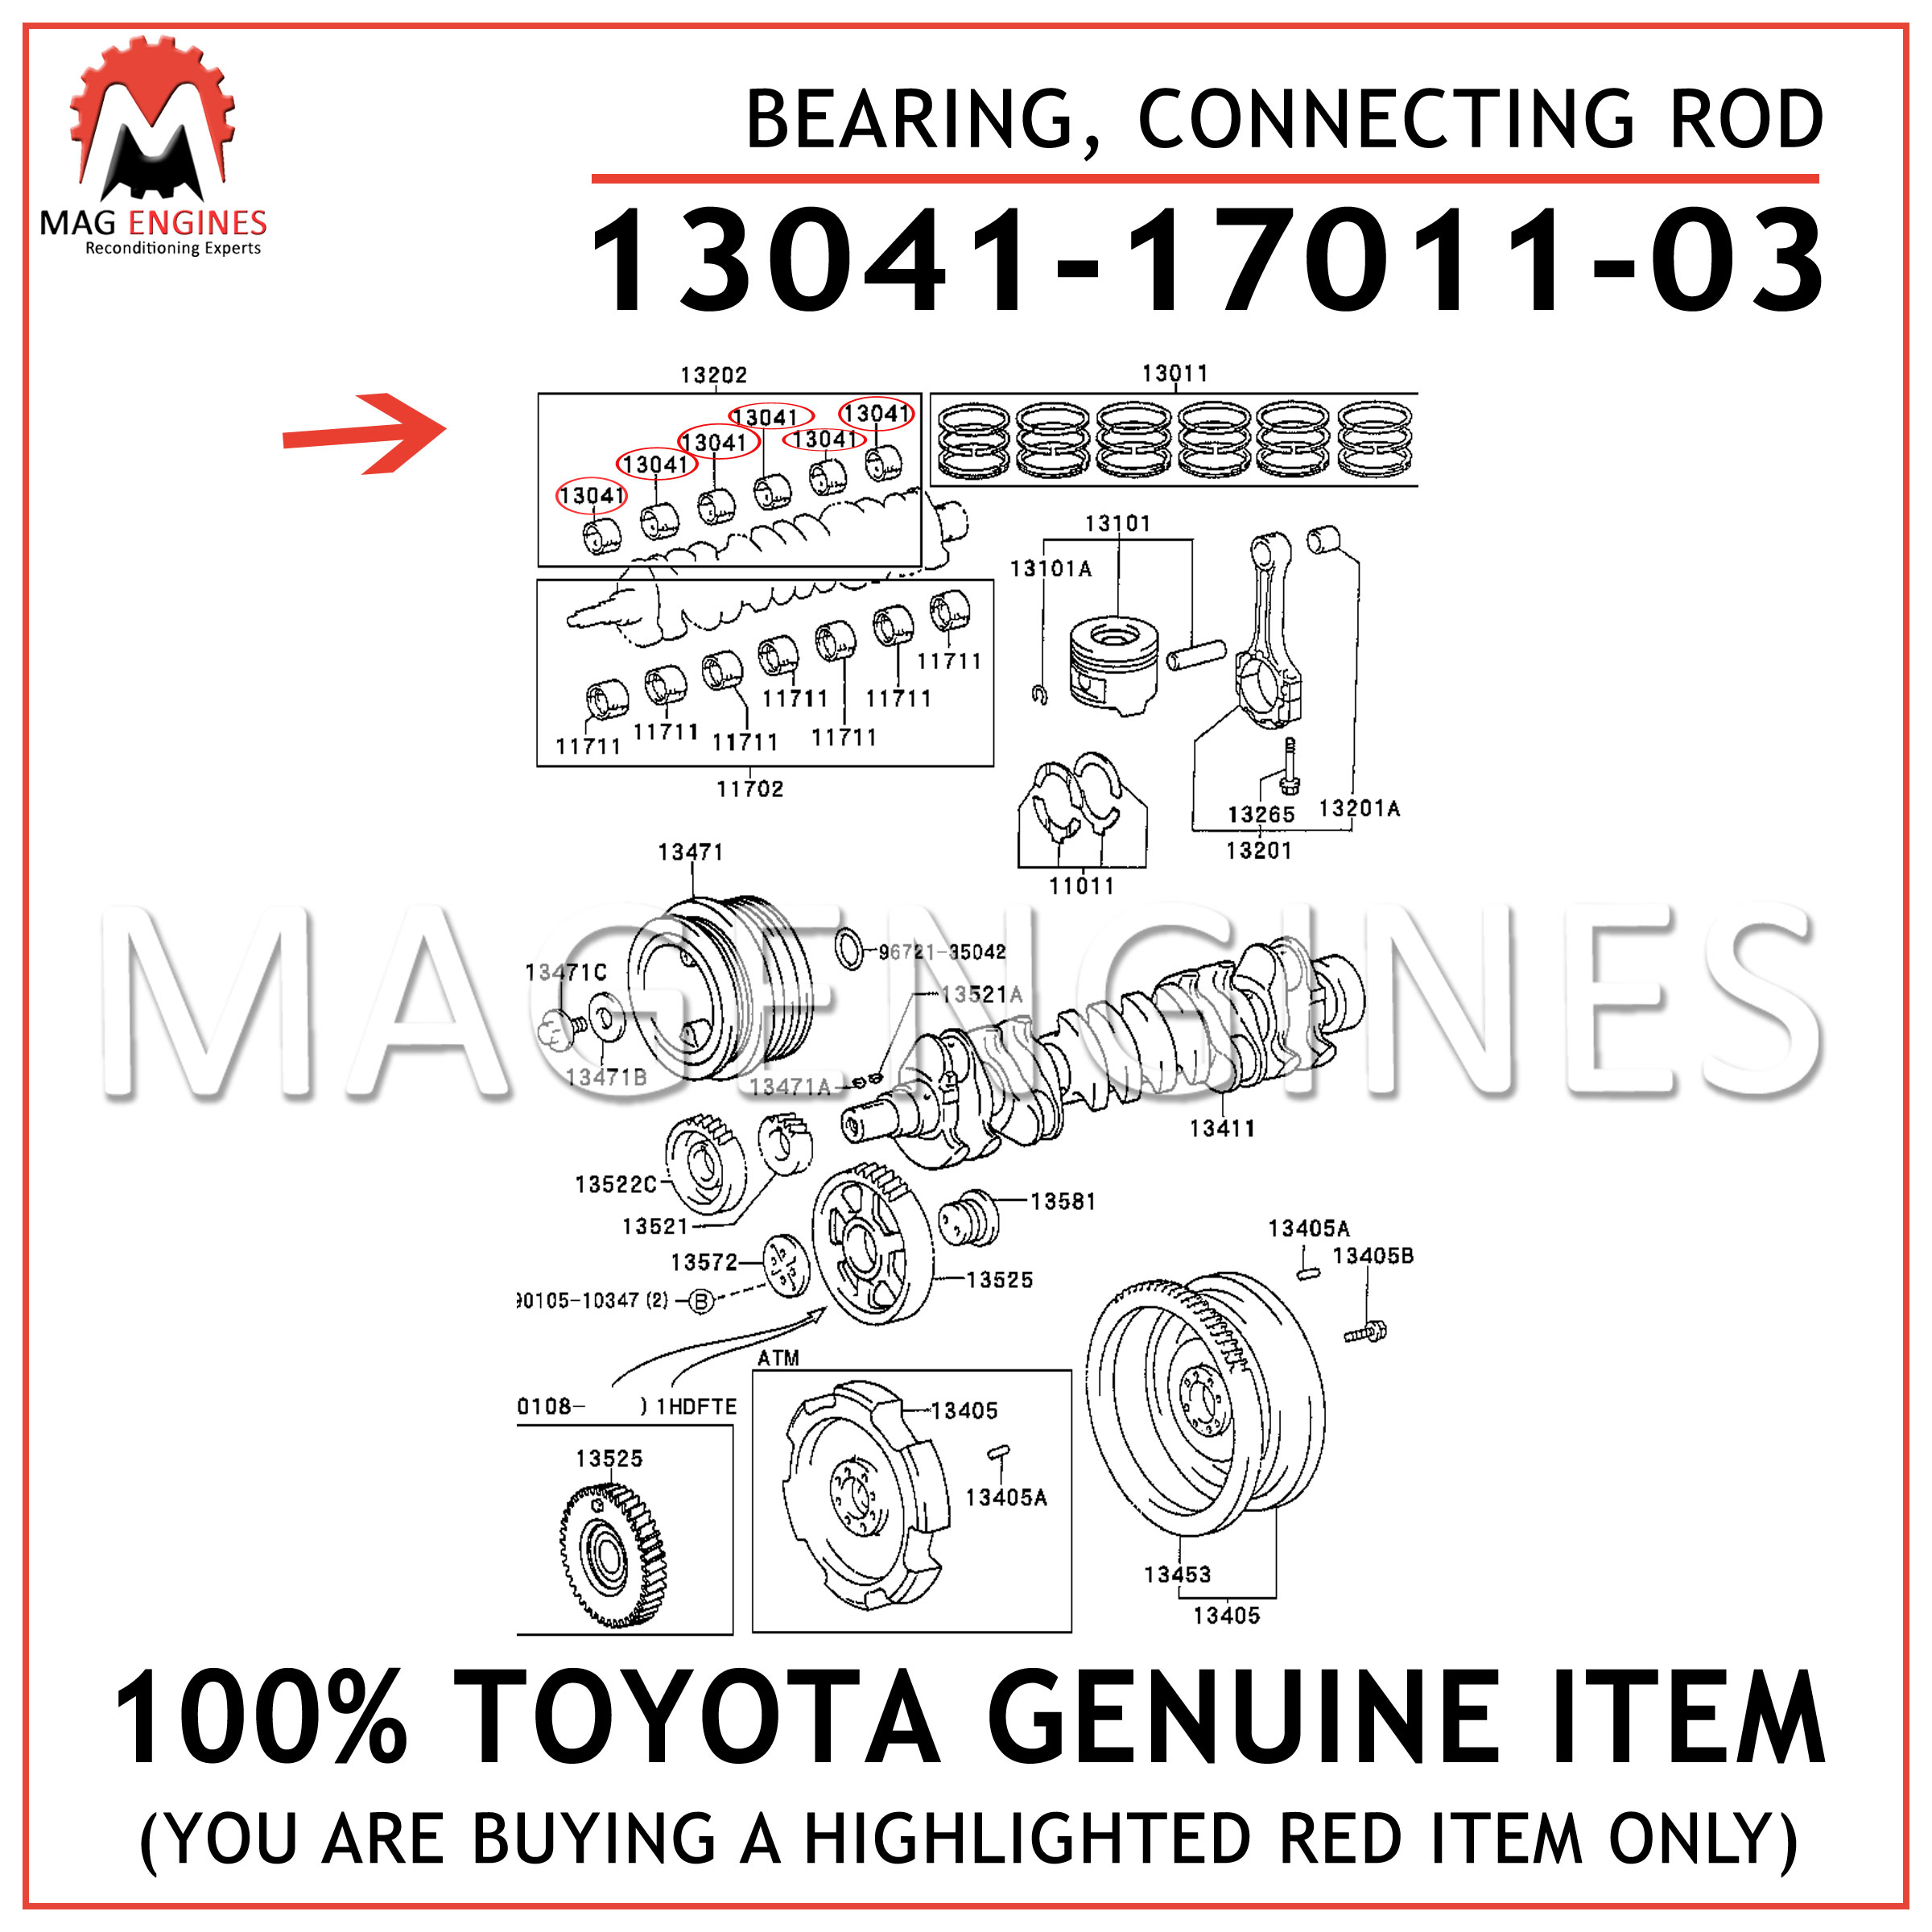 13041-17011-03 TOYOTA GENUINE BEARING, CONNECTING ROD 130411701103 